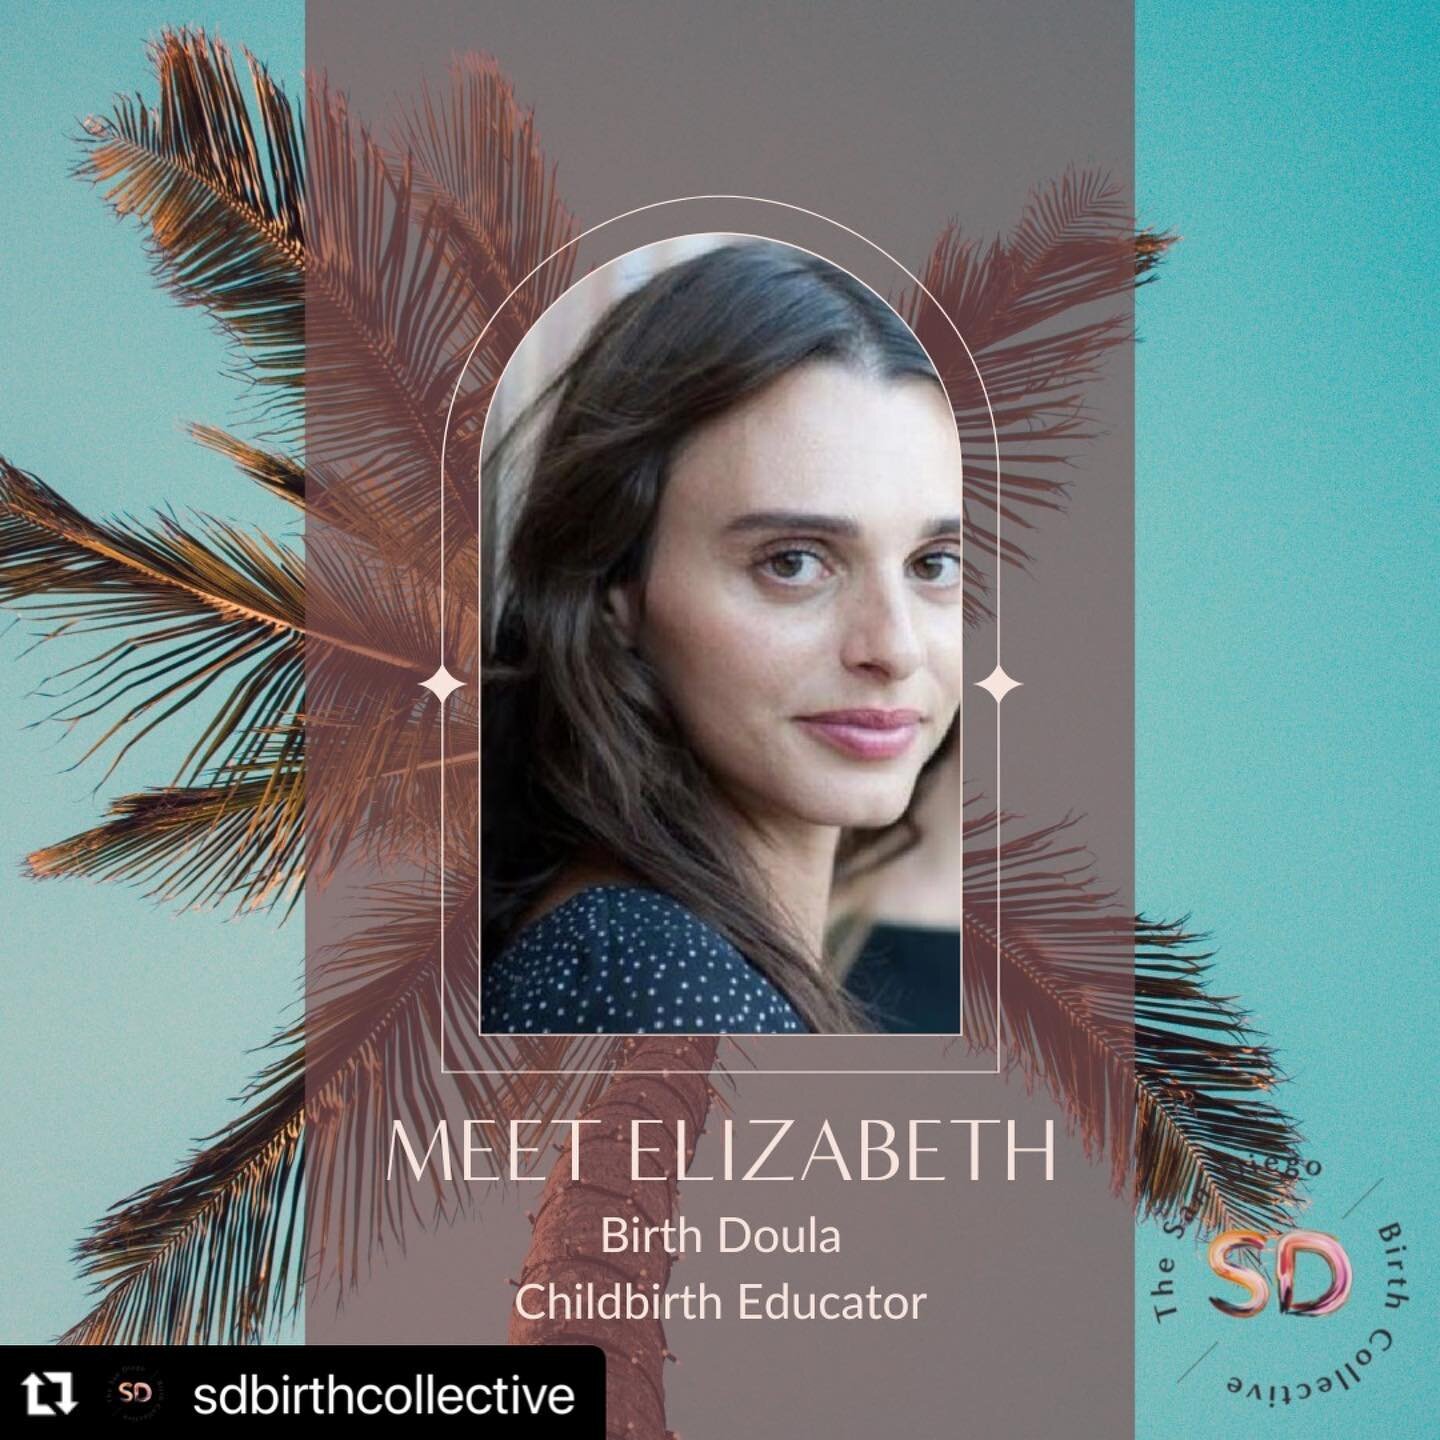 @sdbirthcollective with @use.repost
・・・
T E A M |  Meet Liz!! As a birth doula, childbirth educator, placenta specialist and belly binder, Liz is an incredible resource and support to the families she supports. We are thrilled to have her wealth of e